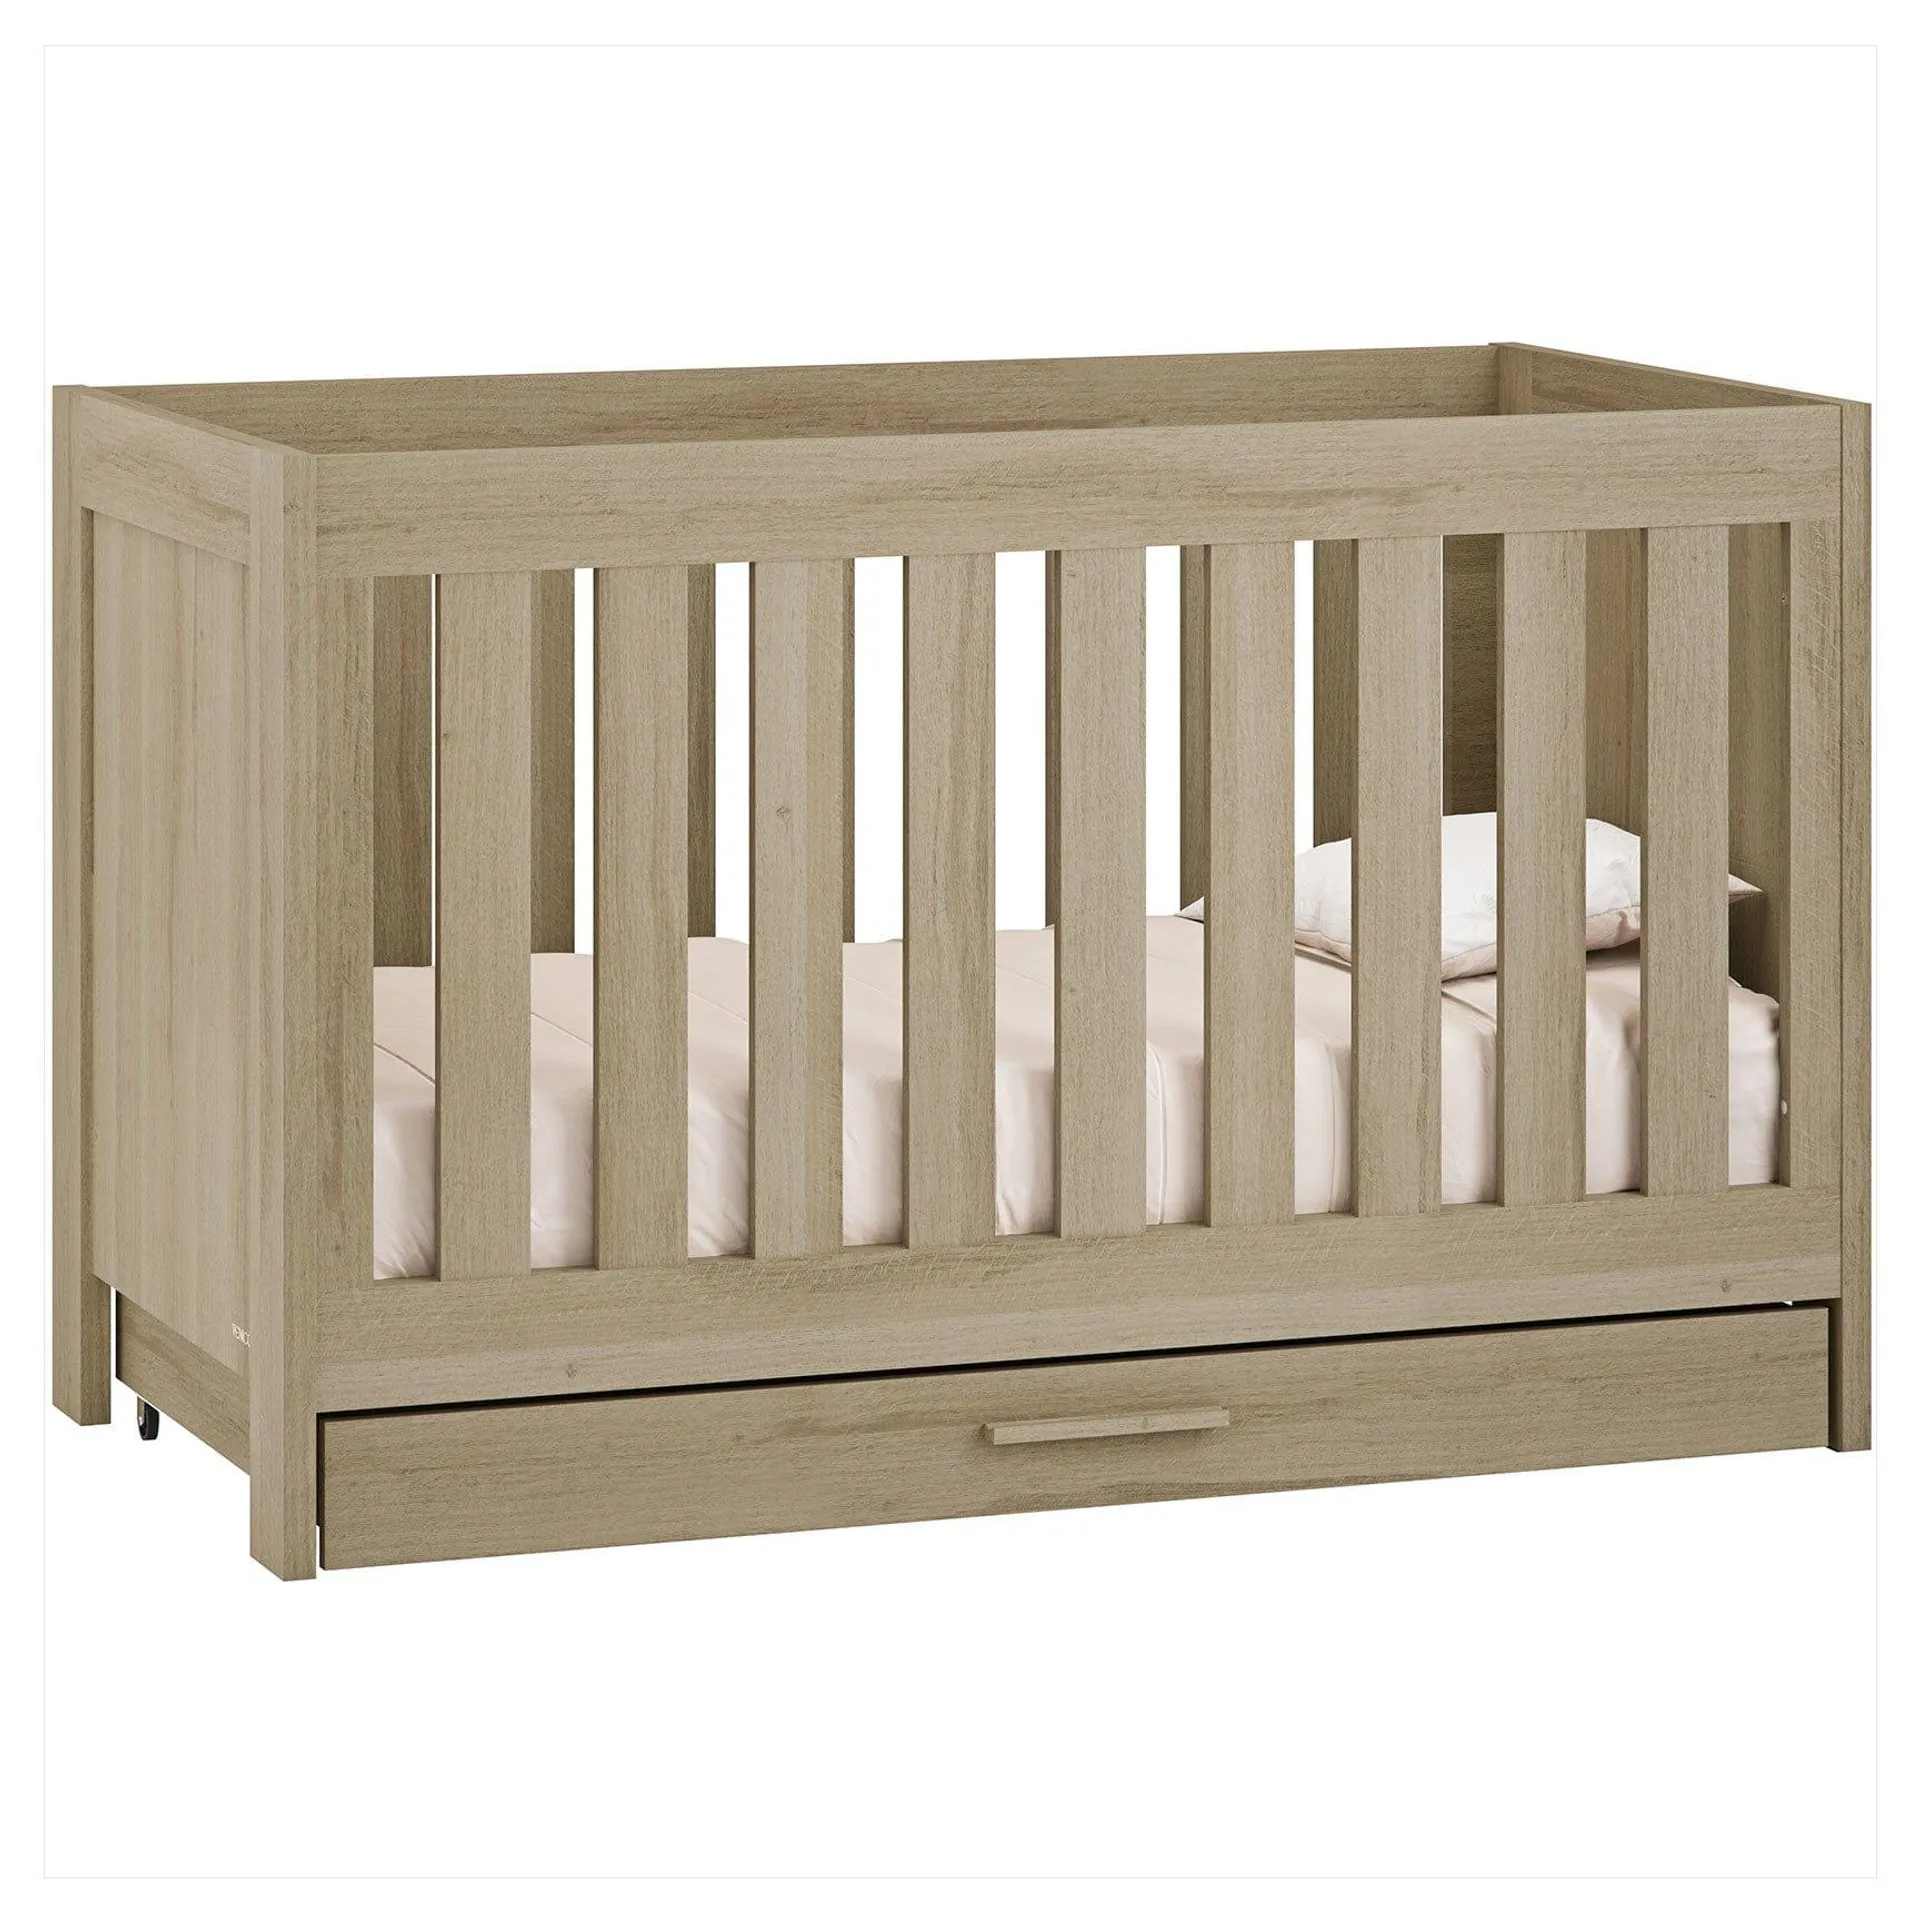 Venicci Forenzo Cot Bed with Drawer in Honey Oak